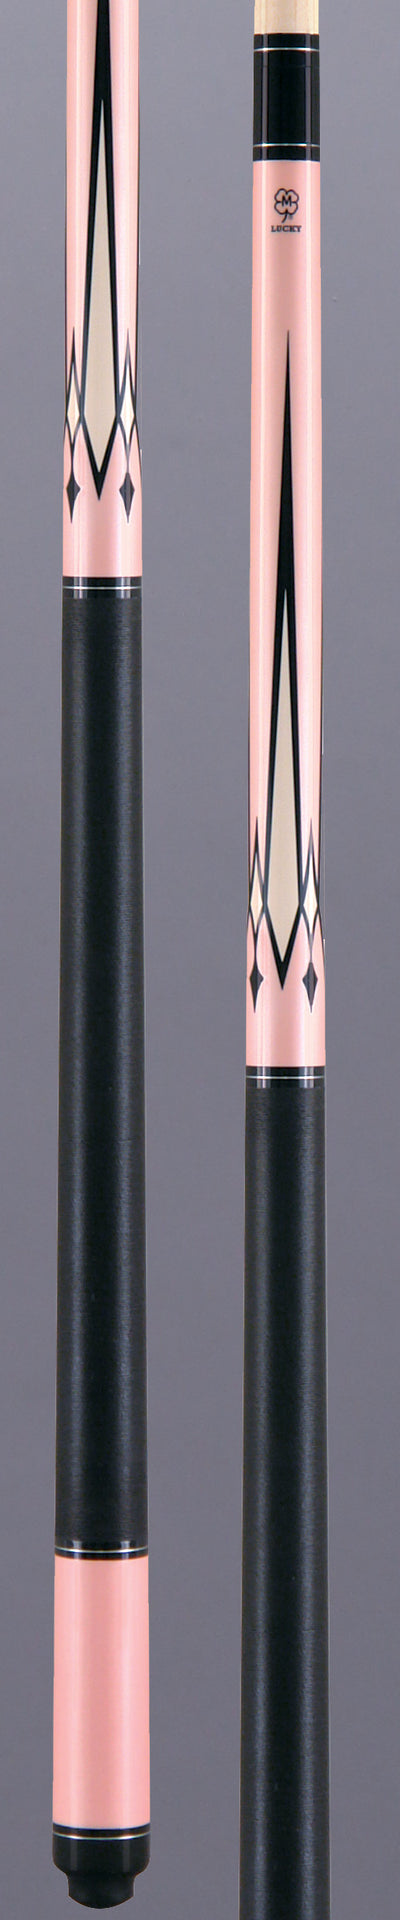 Lucky L17  Pink 4 Point Cue